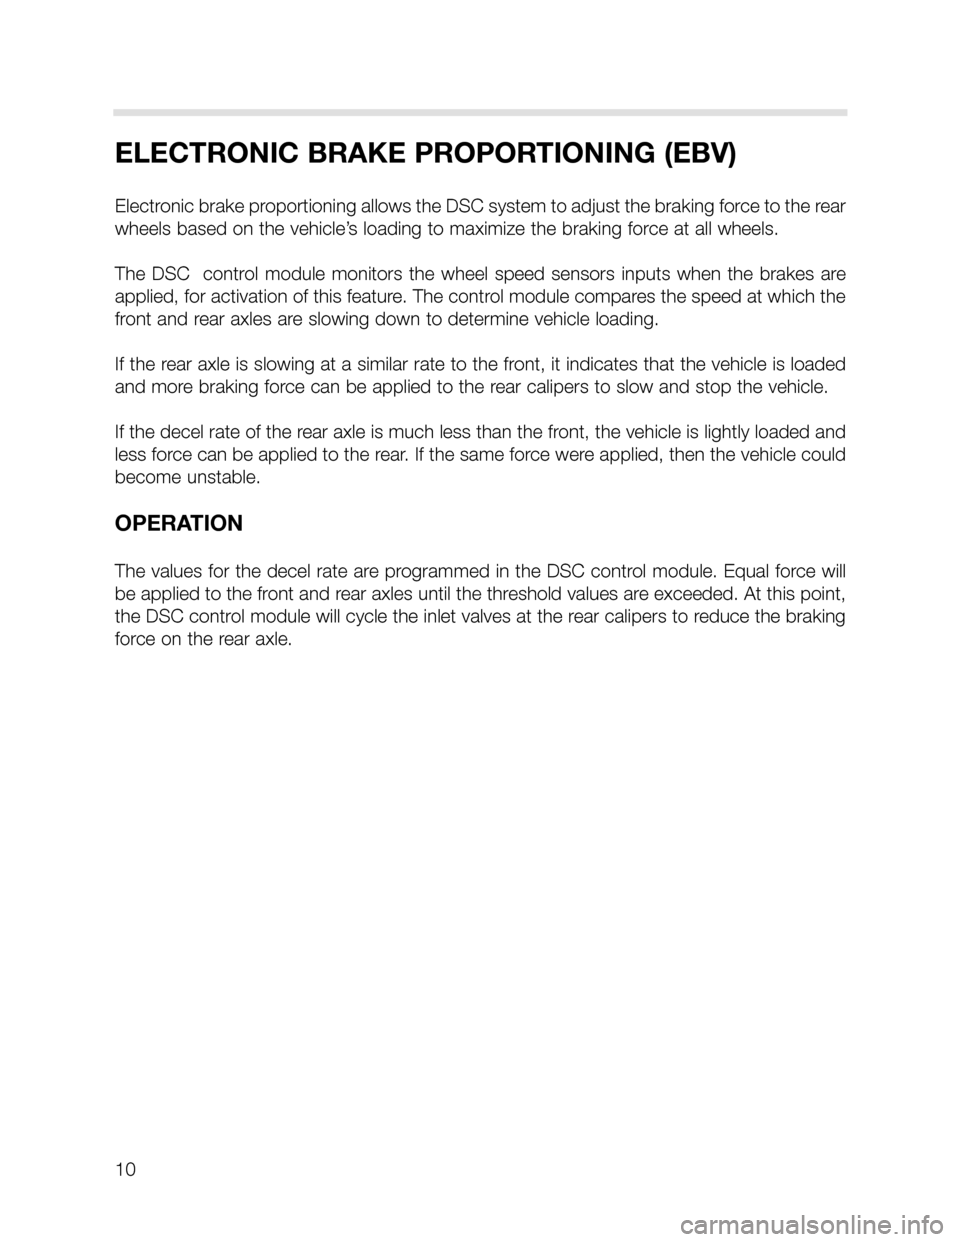 BMW X5 2006 E53 DSC System Workshop Manual 10
ELECTRONIC BRAKE PROPORTIONING (EBV)
Electronic brake proportioning allows the DSC system to adjust the braking force to the rear
wheels based on the vehicle’s loading to maximize the braking for